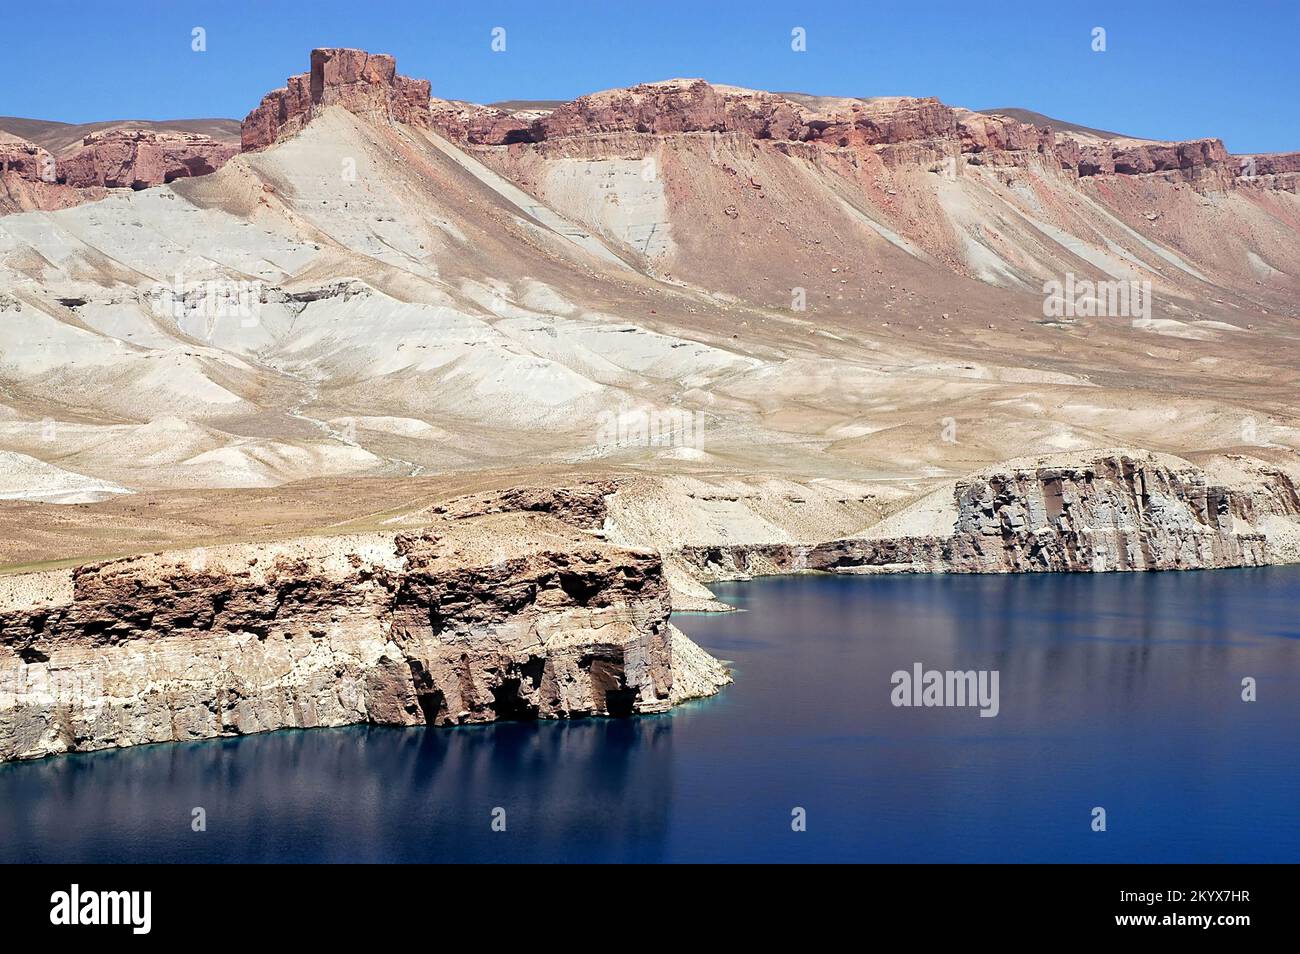 Band-e Amir lakes near Bamyan (Bamiyan) in Central Afghanistan. This is the largest of the natural blue lakes at Band e Amir. Stock Photo